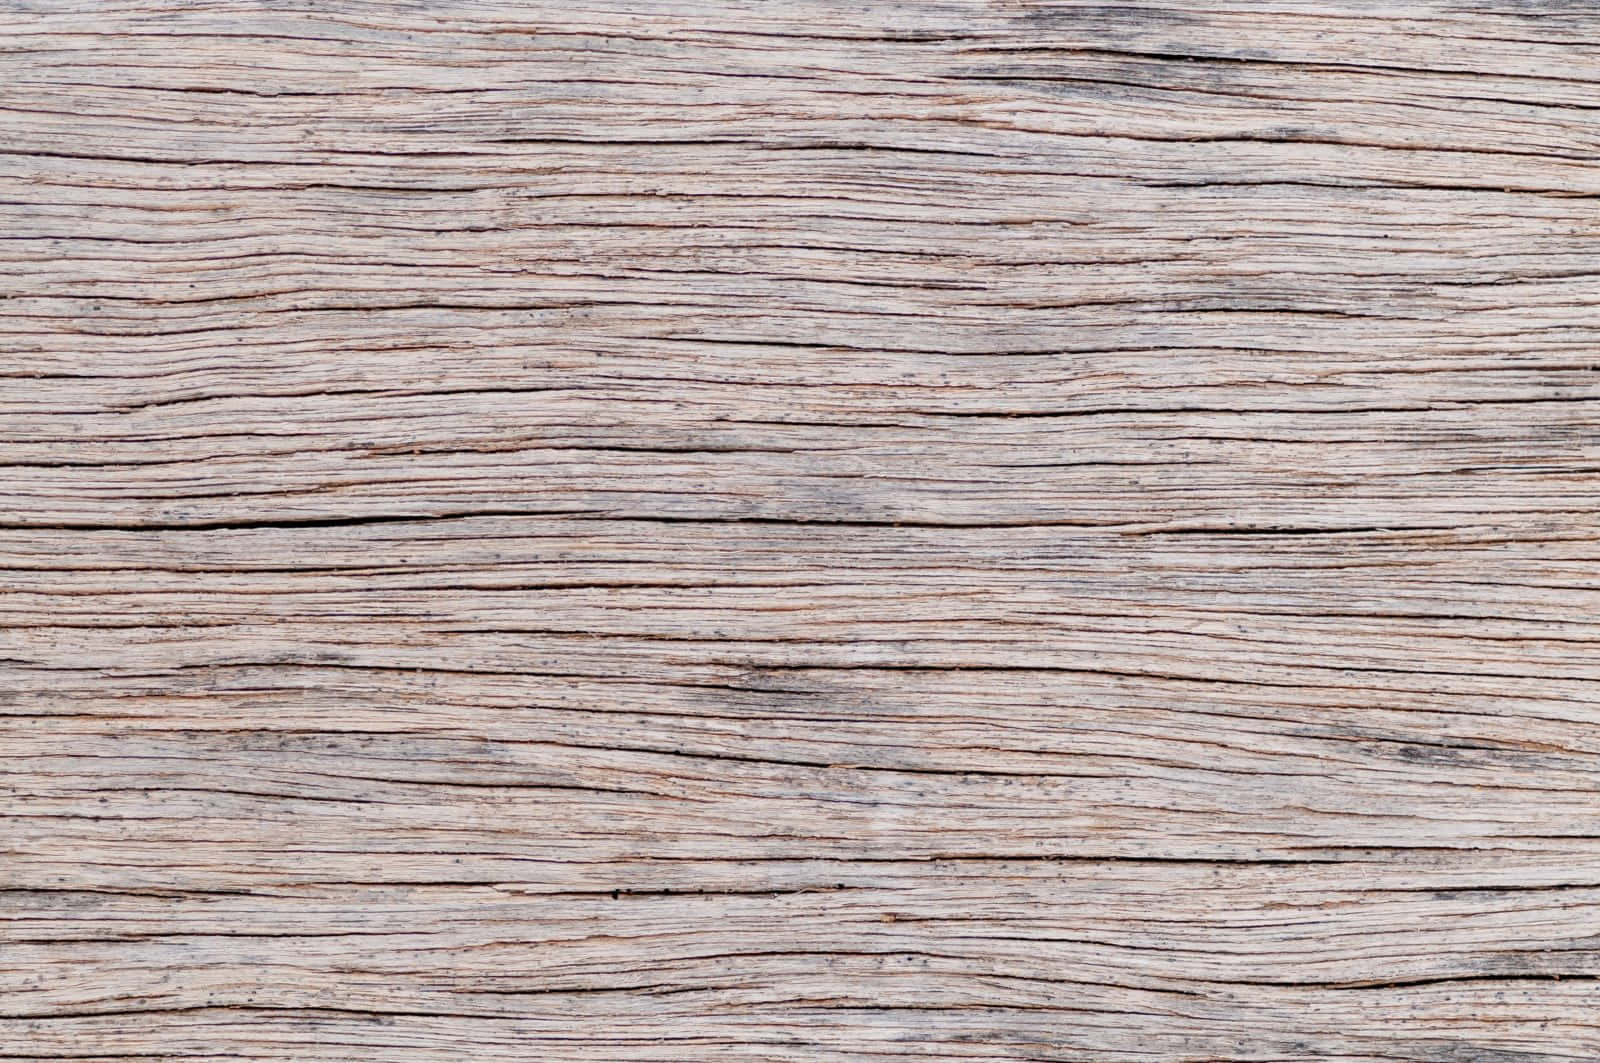 Nature's beauty, High Resolution Wood Background